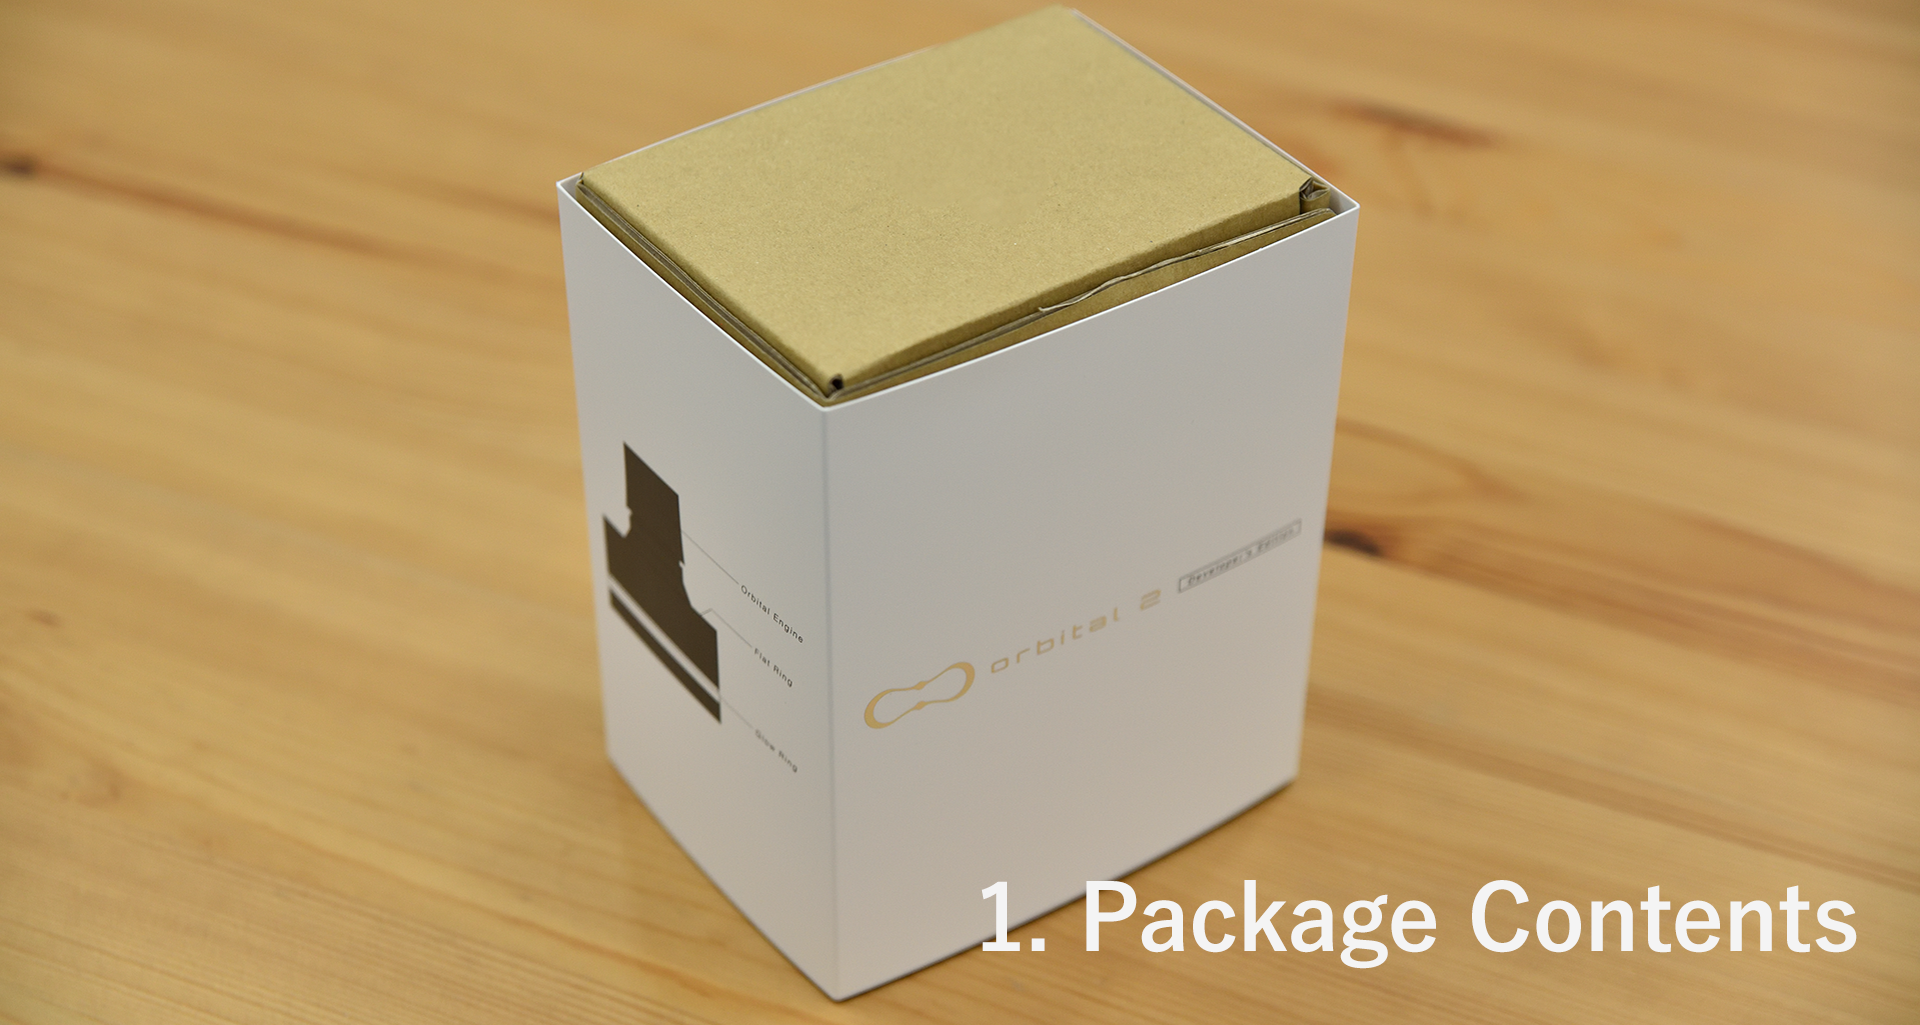 1. Package Contents